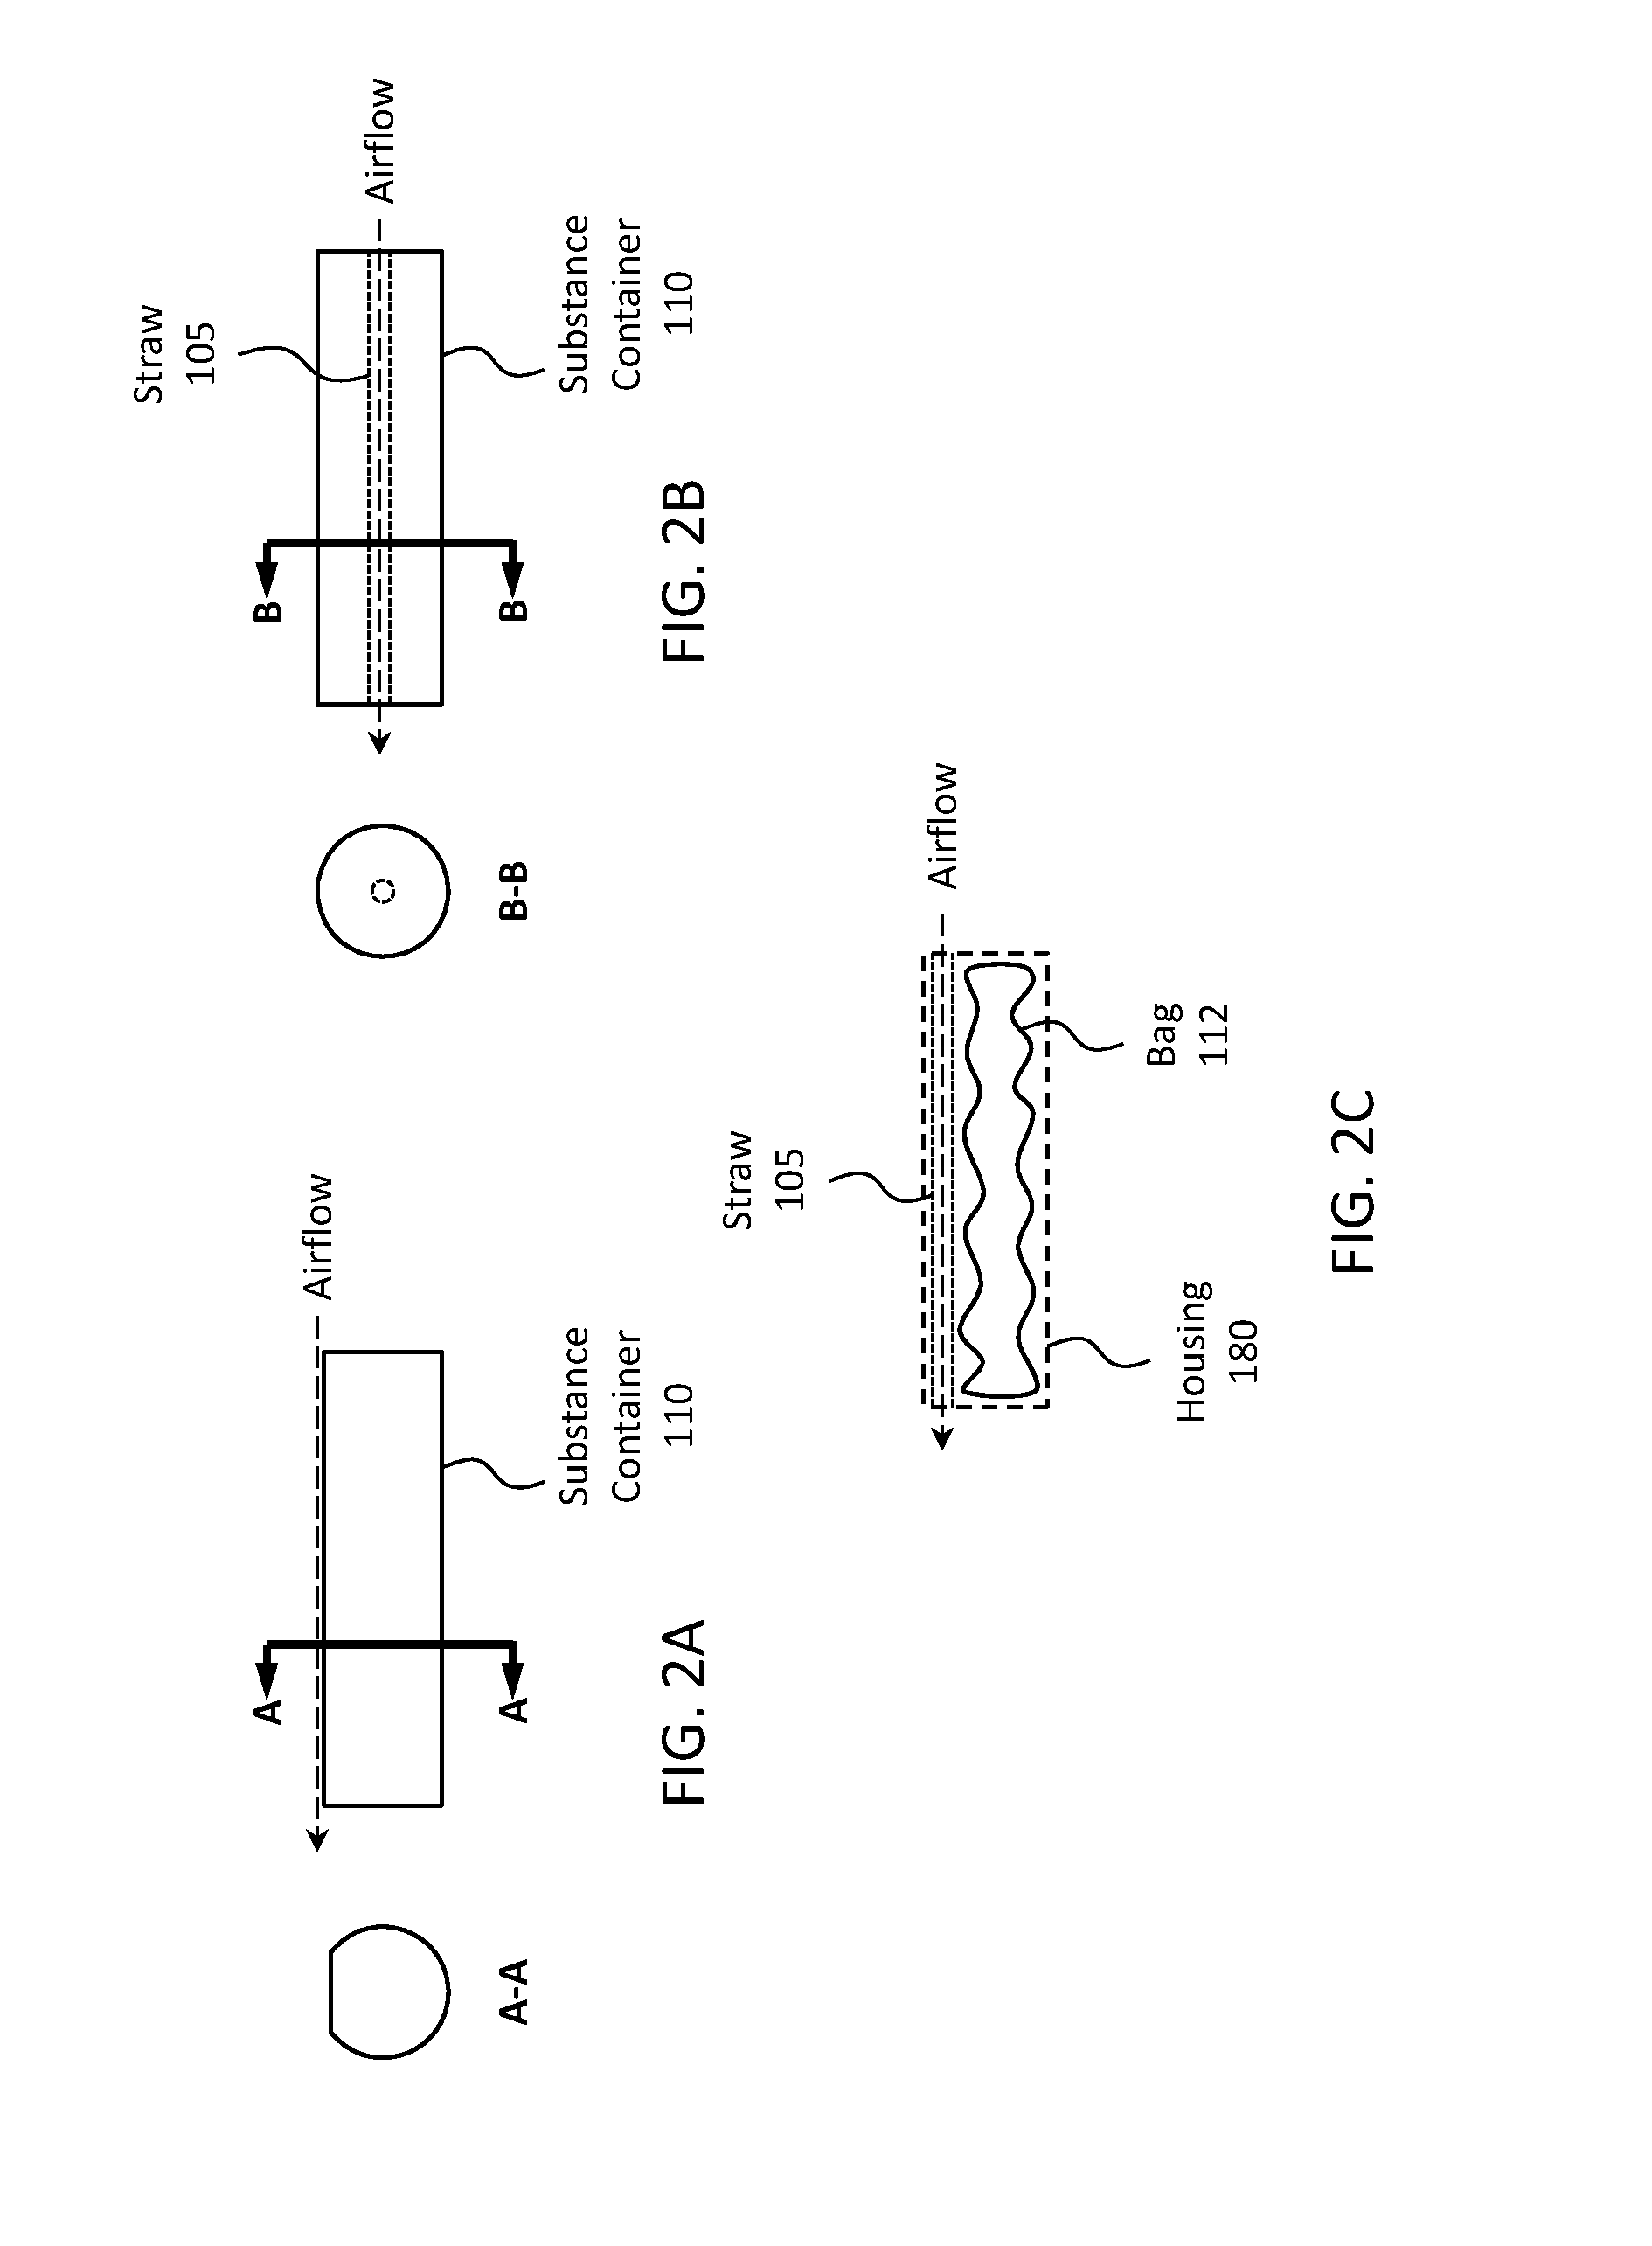 Systems and methods for a vaporization device and product usage control and documentation